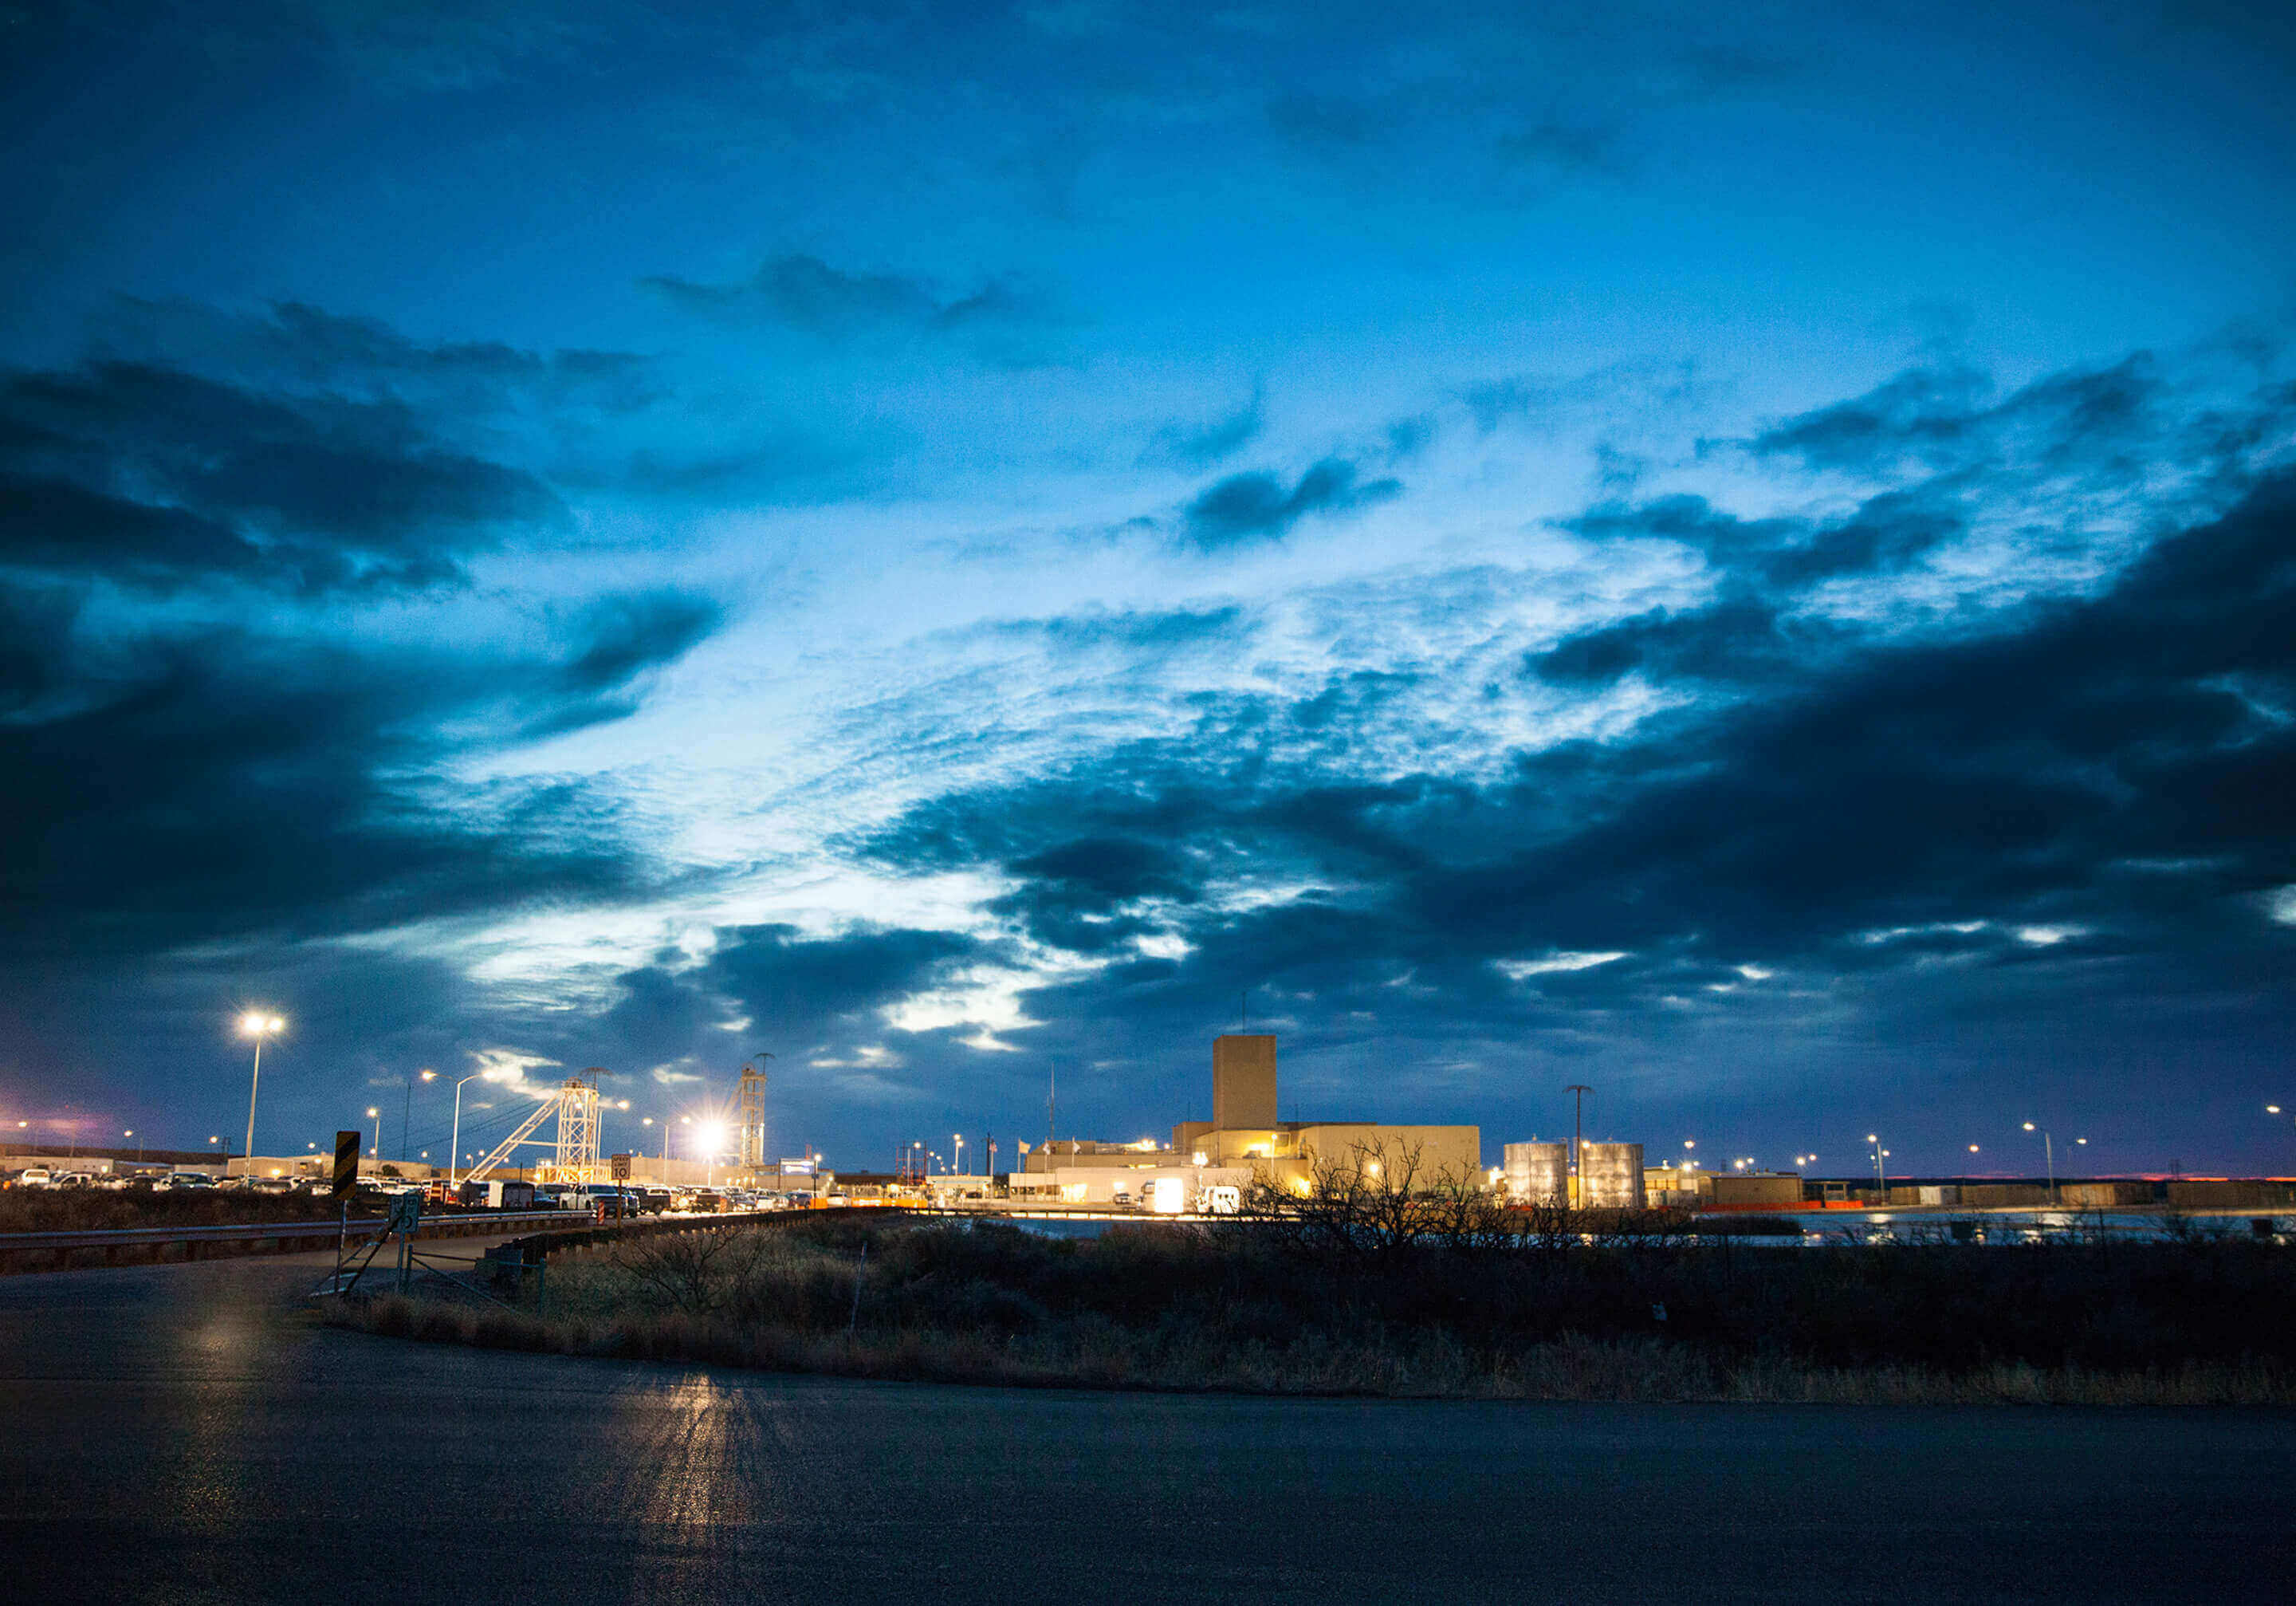 Landscape image of the Waste Isolation Pilot Plant at dusk with with dark blue clouds overhead